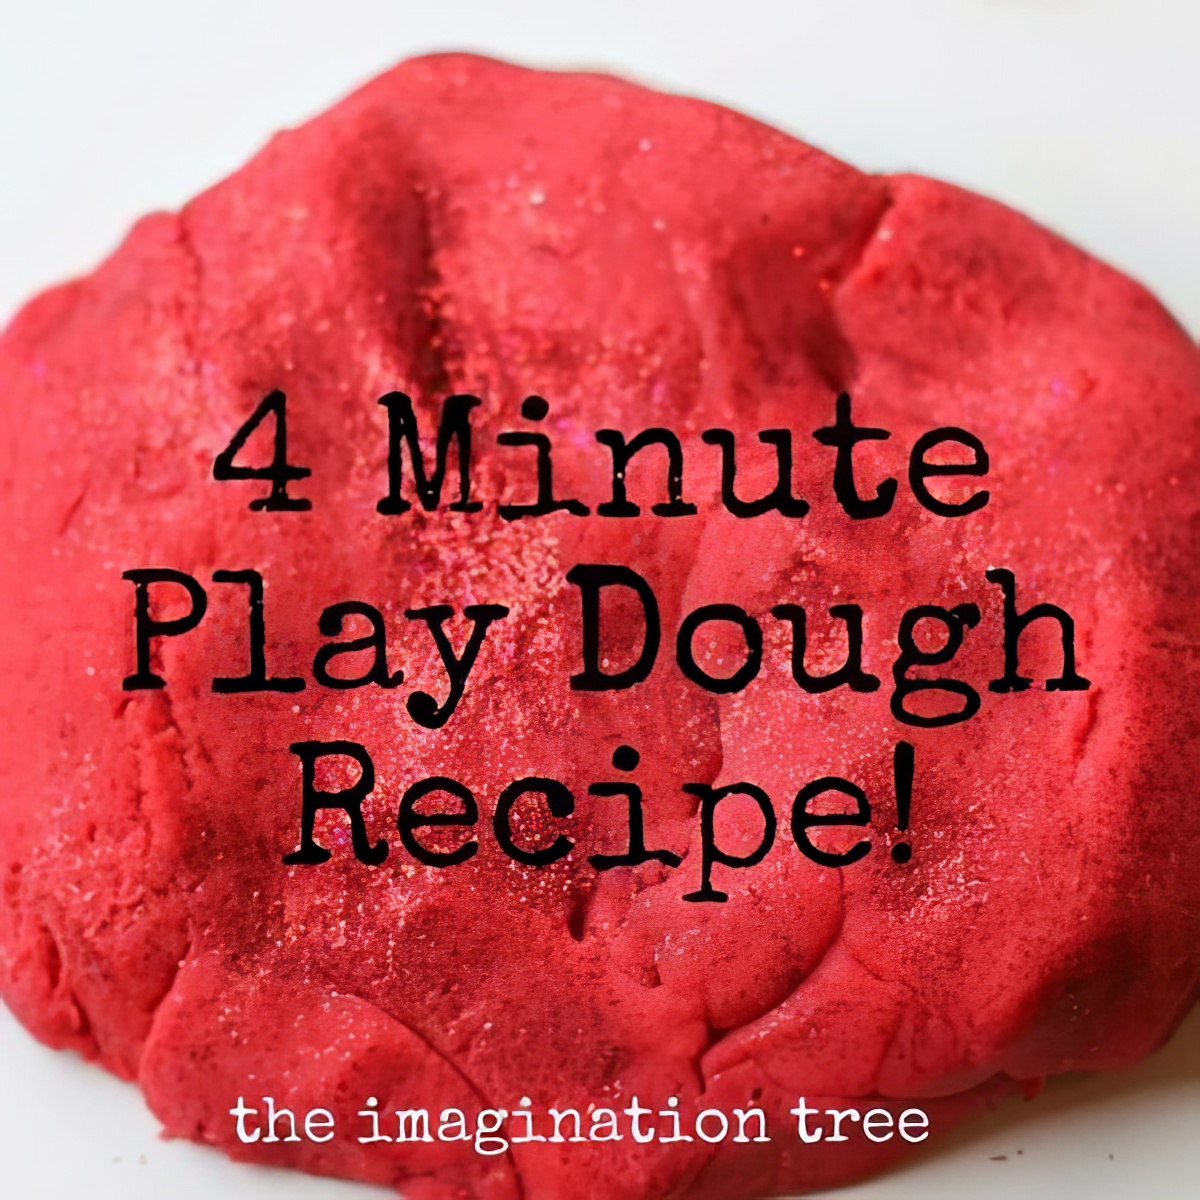 This easy homemade playdough is just 4 minutes to do with your kids this weekend!